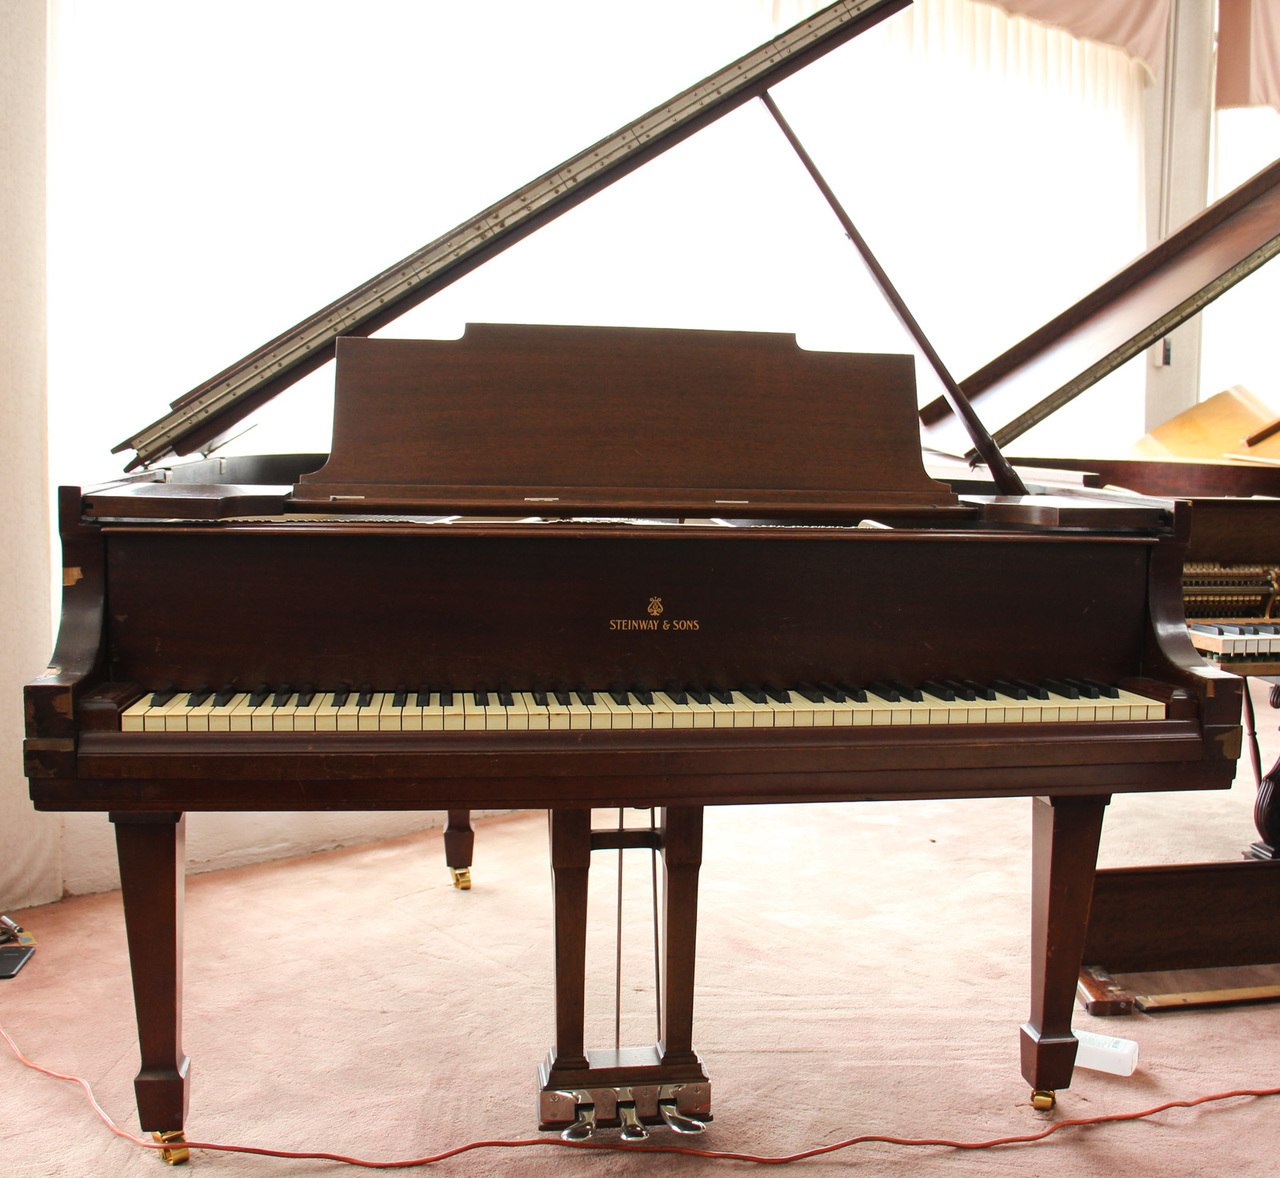 Steinway & Sons 5'7" Model M Grand Piano Rosewood | SN: 231706 | Used